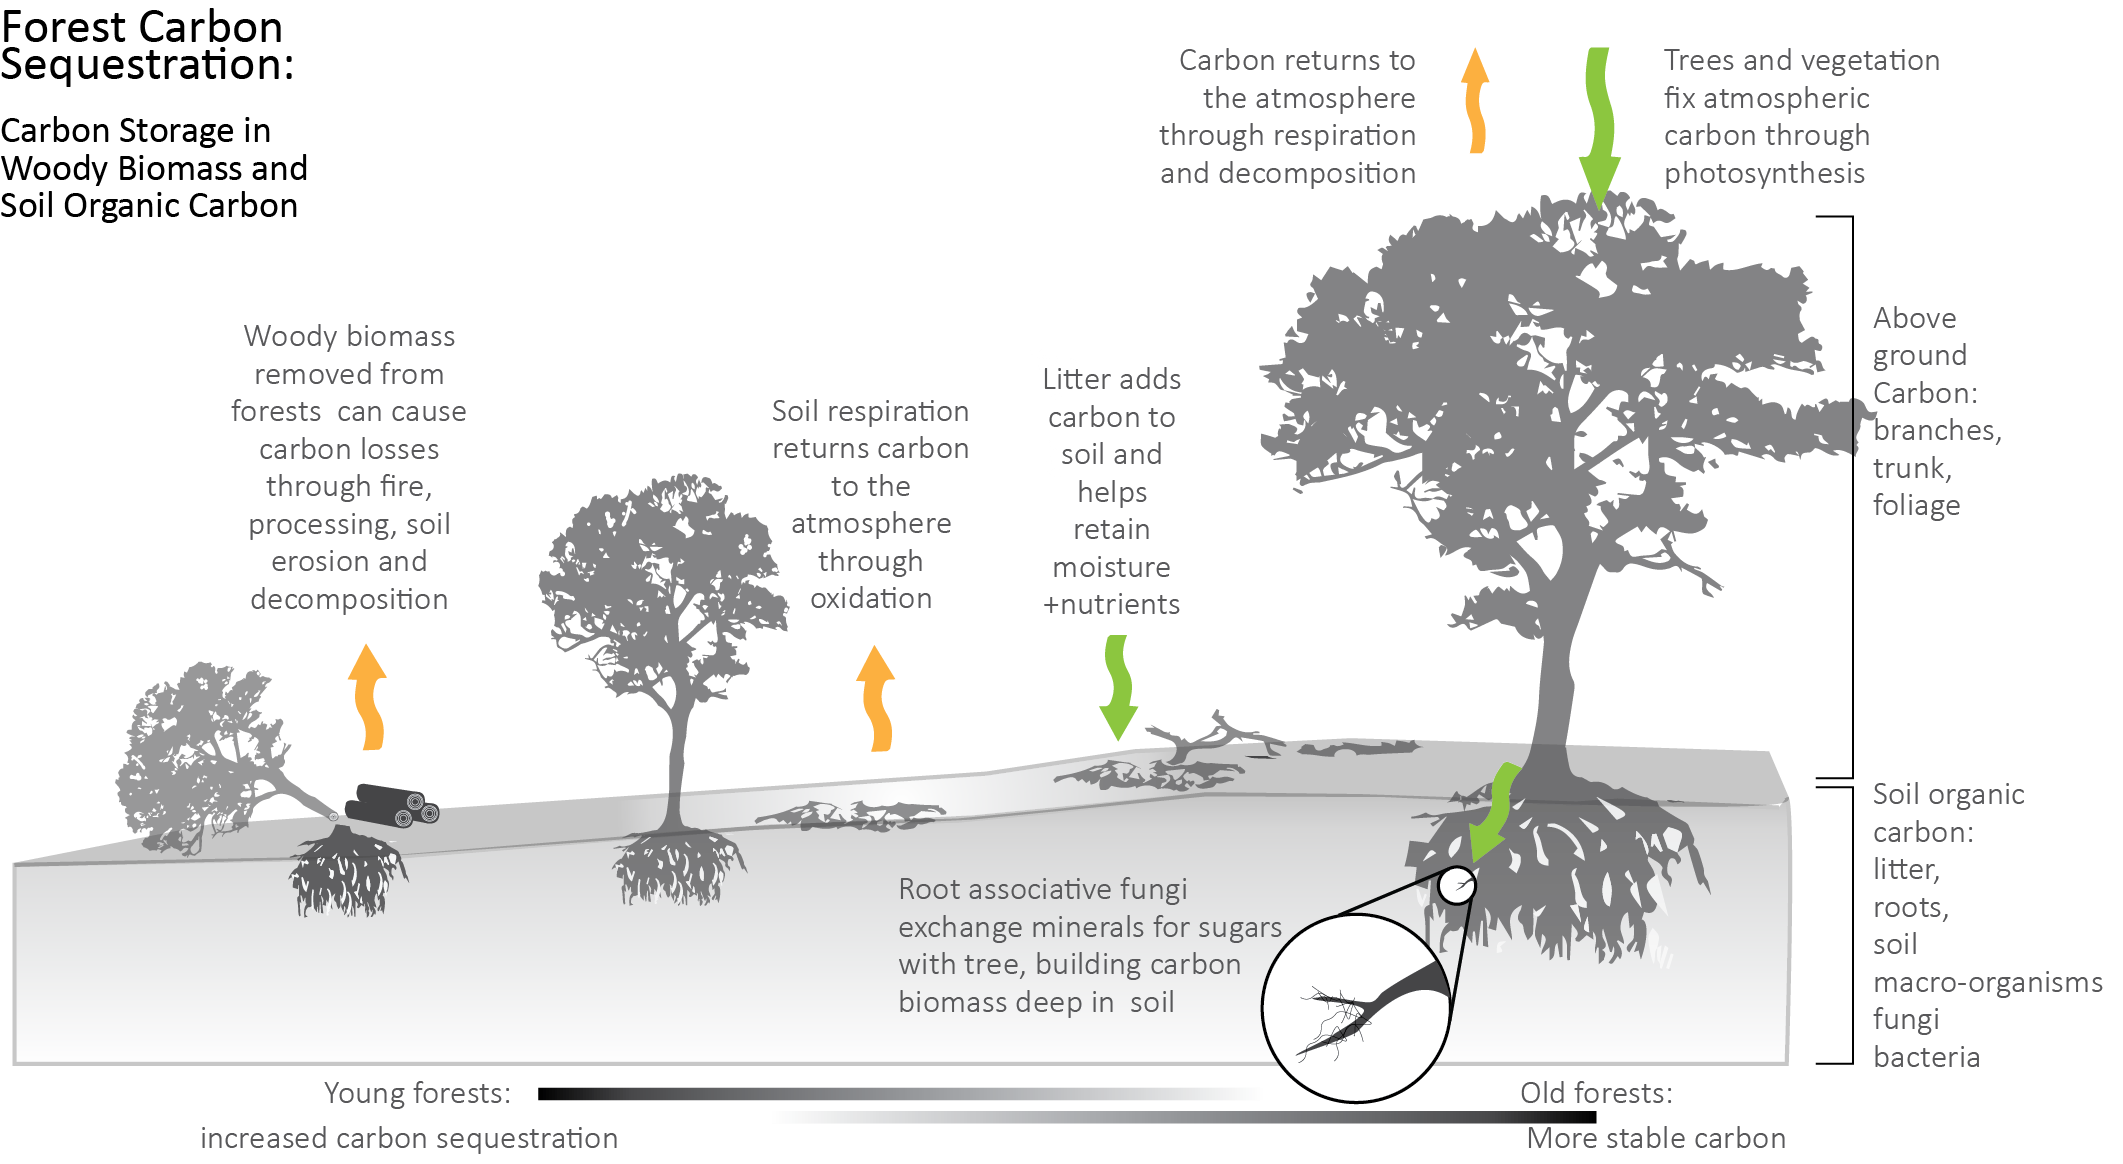 diagram showing how carbon is stored in forest biomass and returned to the atmosphere through fire, harvesting, etc.